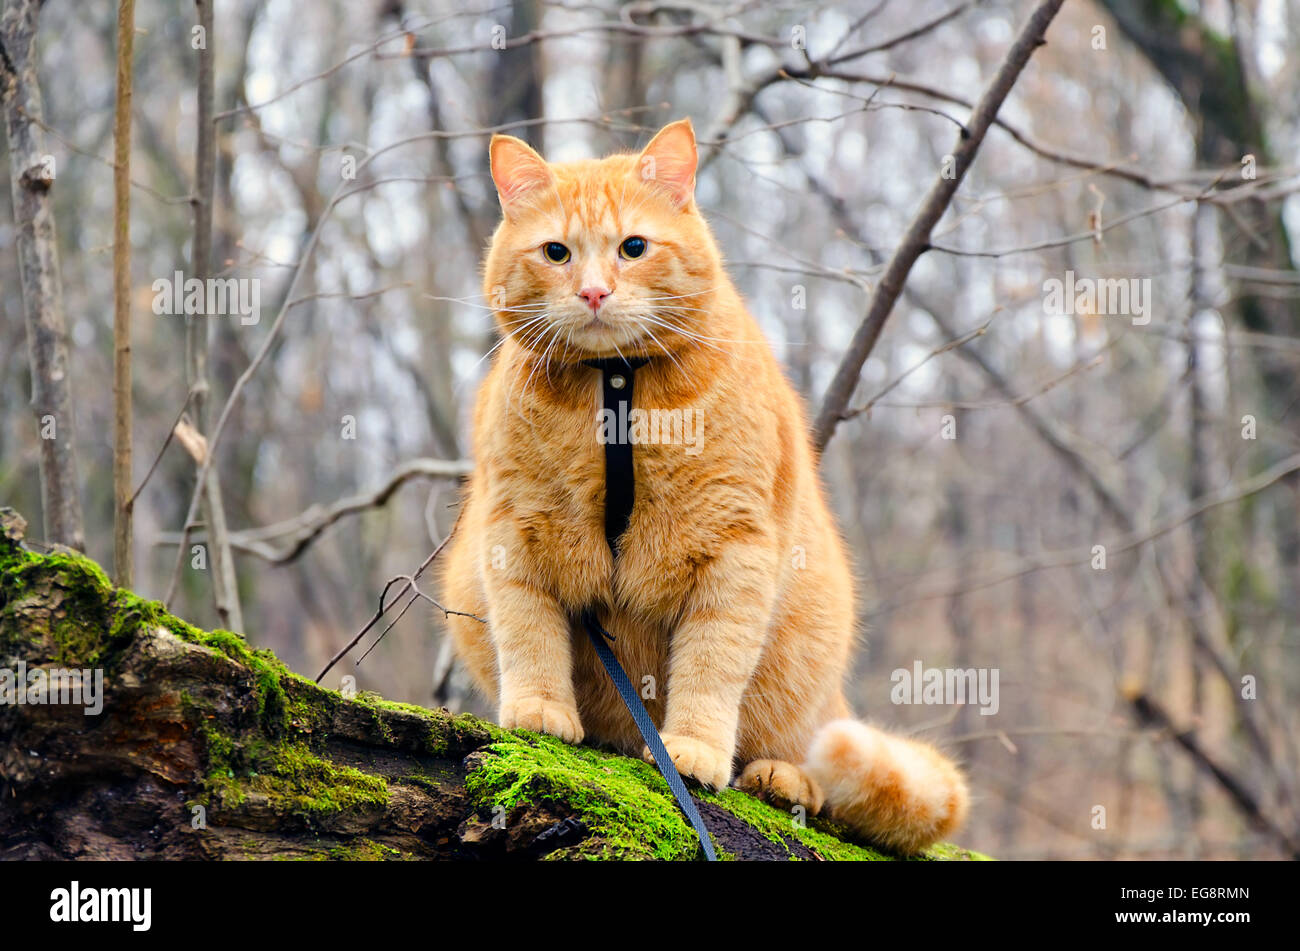 Red cat on a leash sitting on a felled tree in the autumn forest Stock Photo